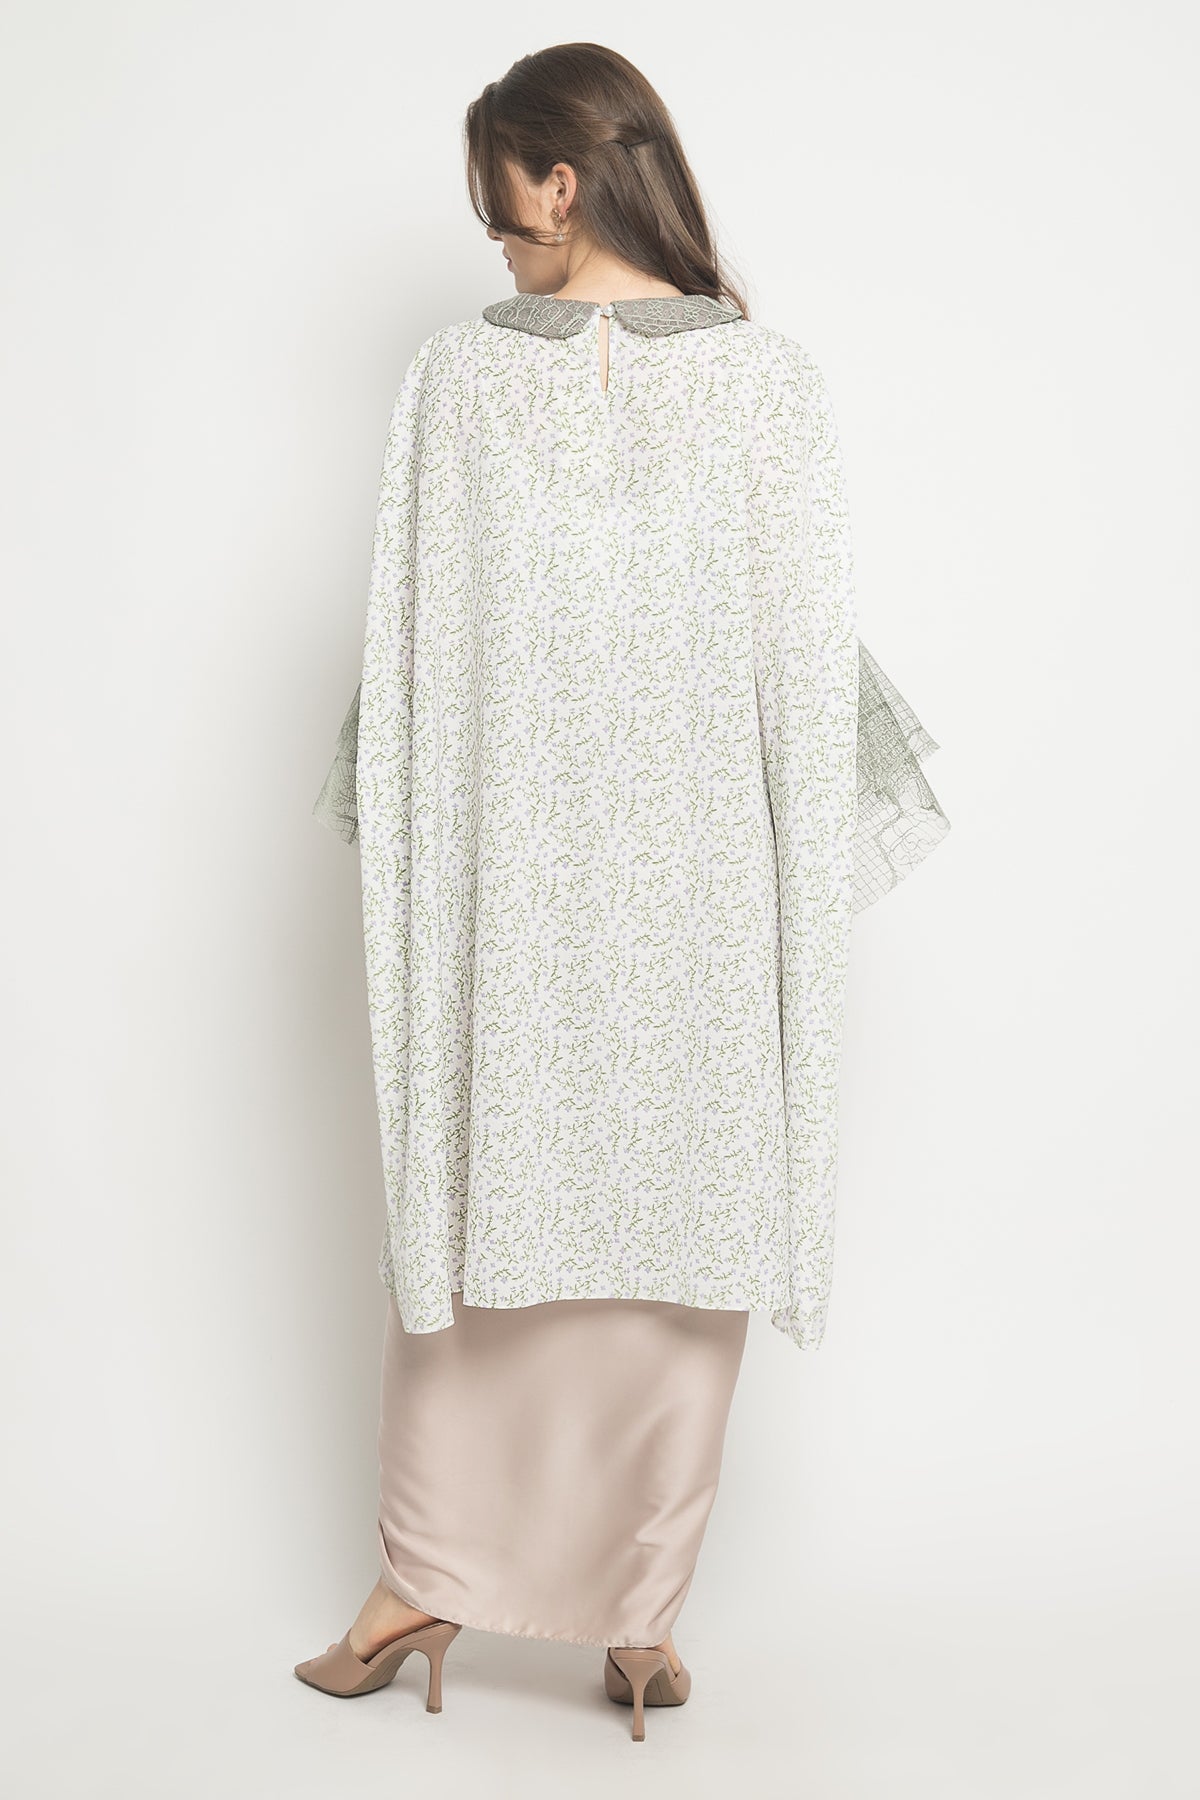 Sridevi Tunic in Sage Green and White